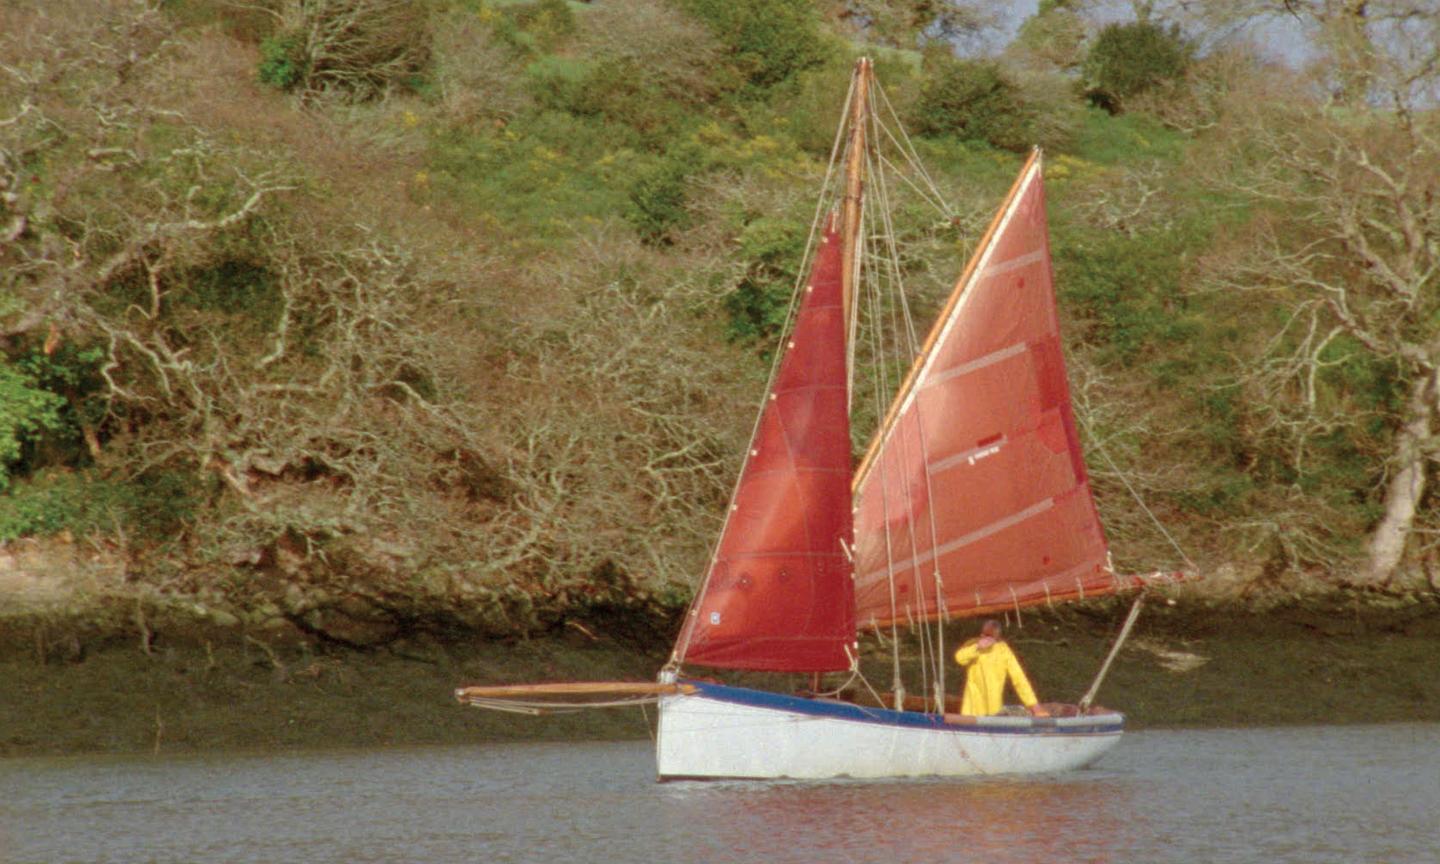 A small white sailing boat with a blue rim and two red sails is in the foreground, behind the boat are trees and a riverbank. On board the boat is a man in a yellow coat.